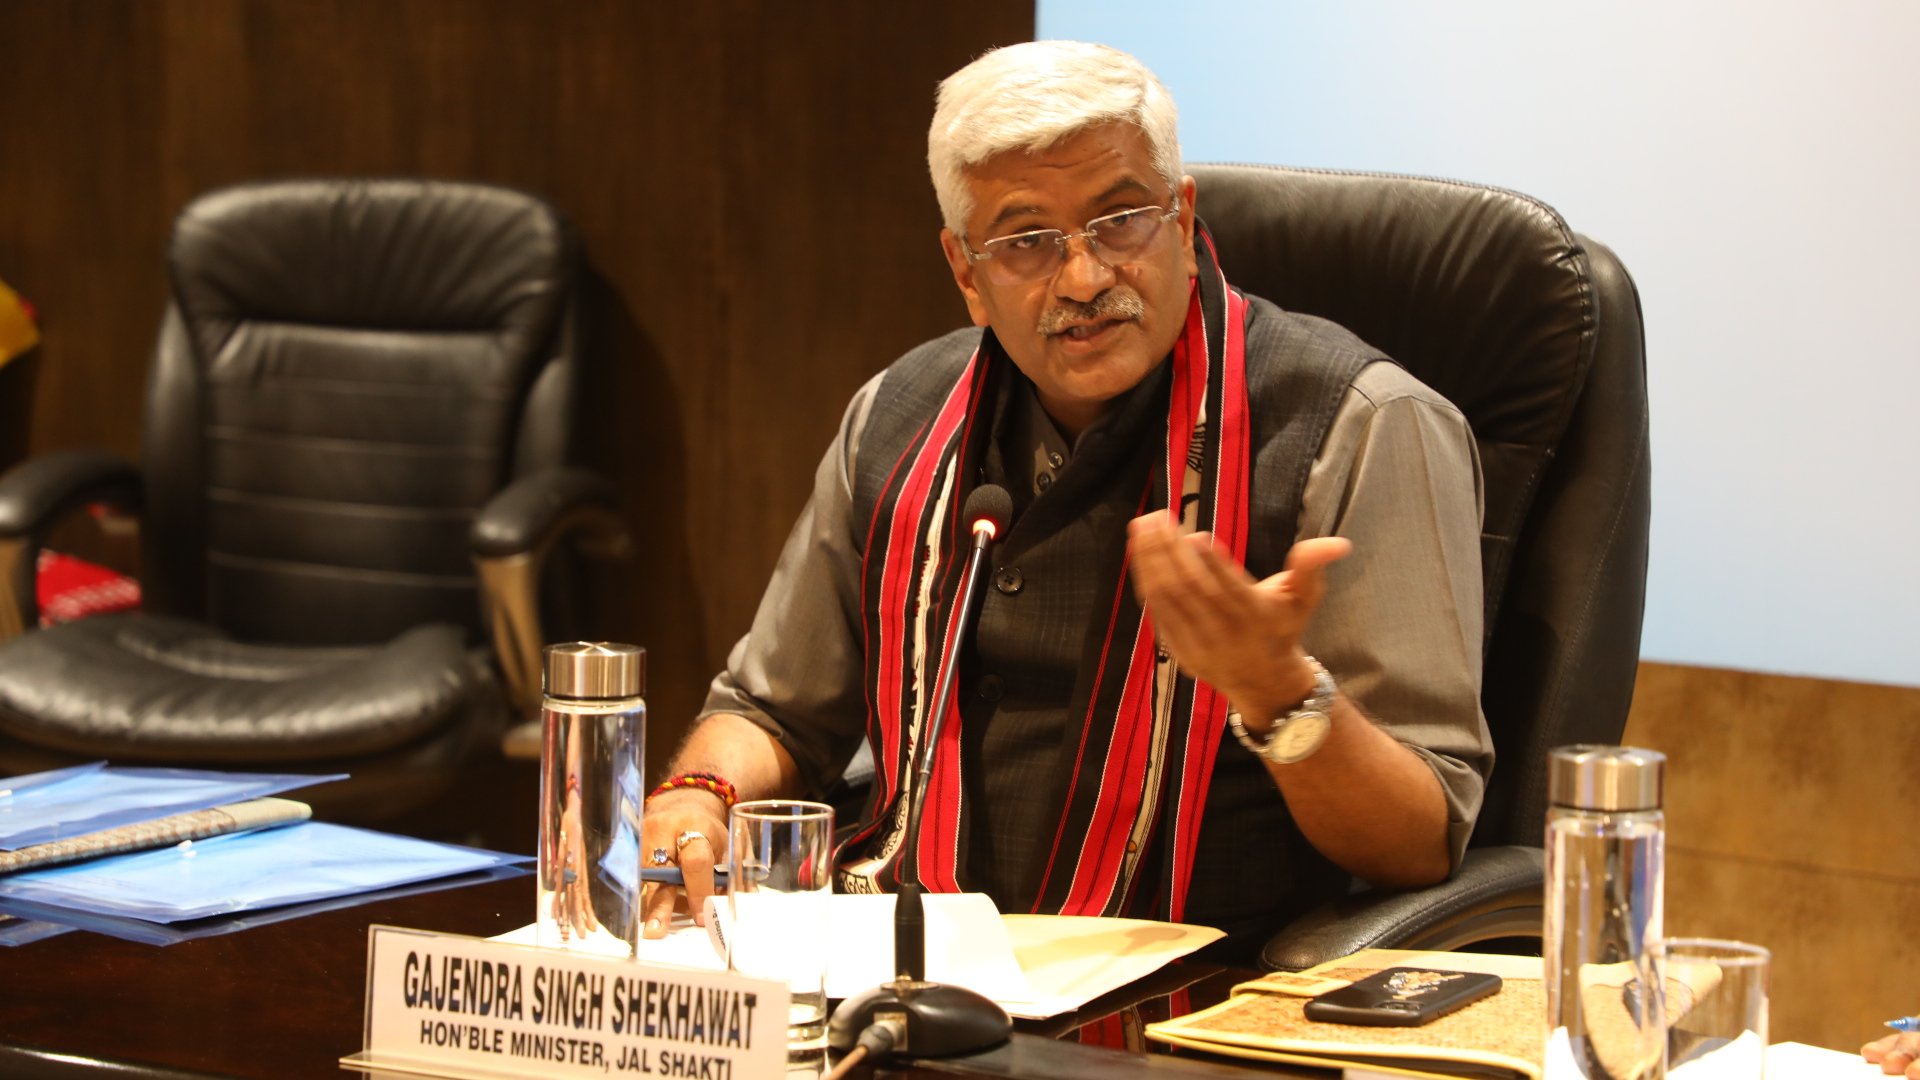 Gajendra Singh Shekhawat chairs Conference of CMs / Ministers of Water Resources of NER on the North East Water Management Authority draft Bill - Odisha Diary